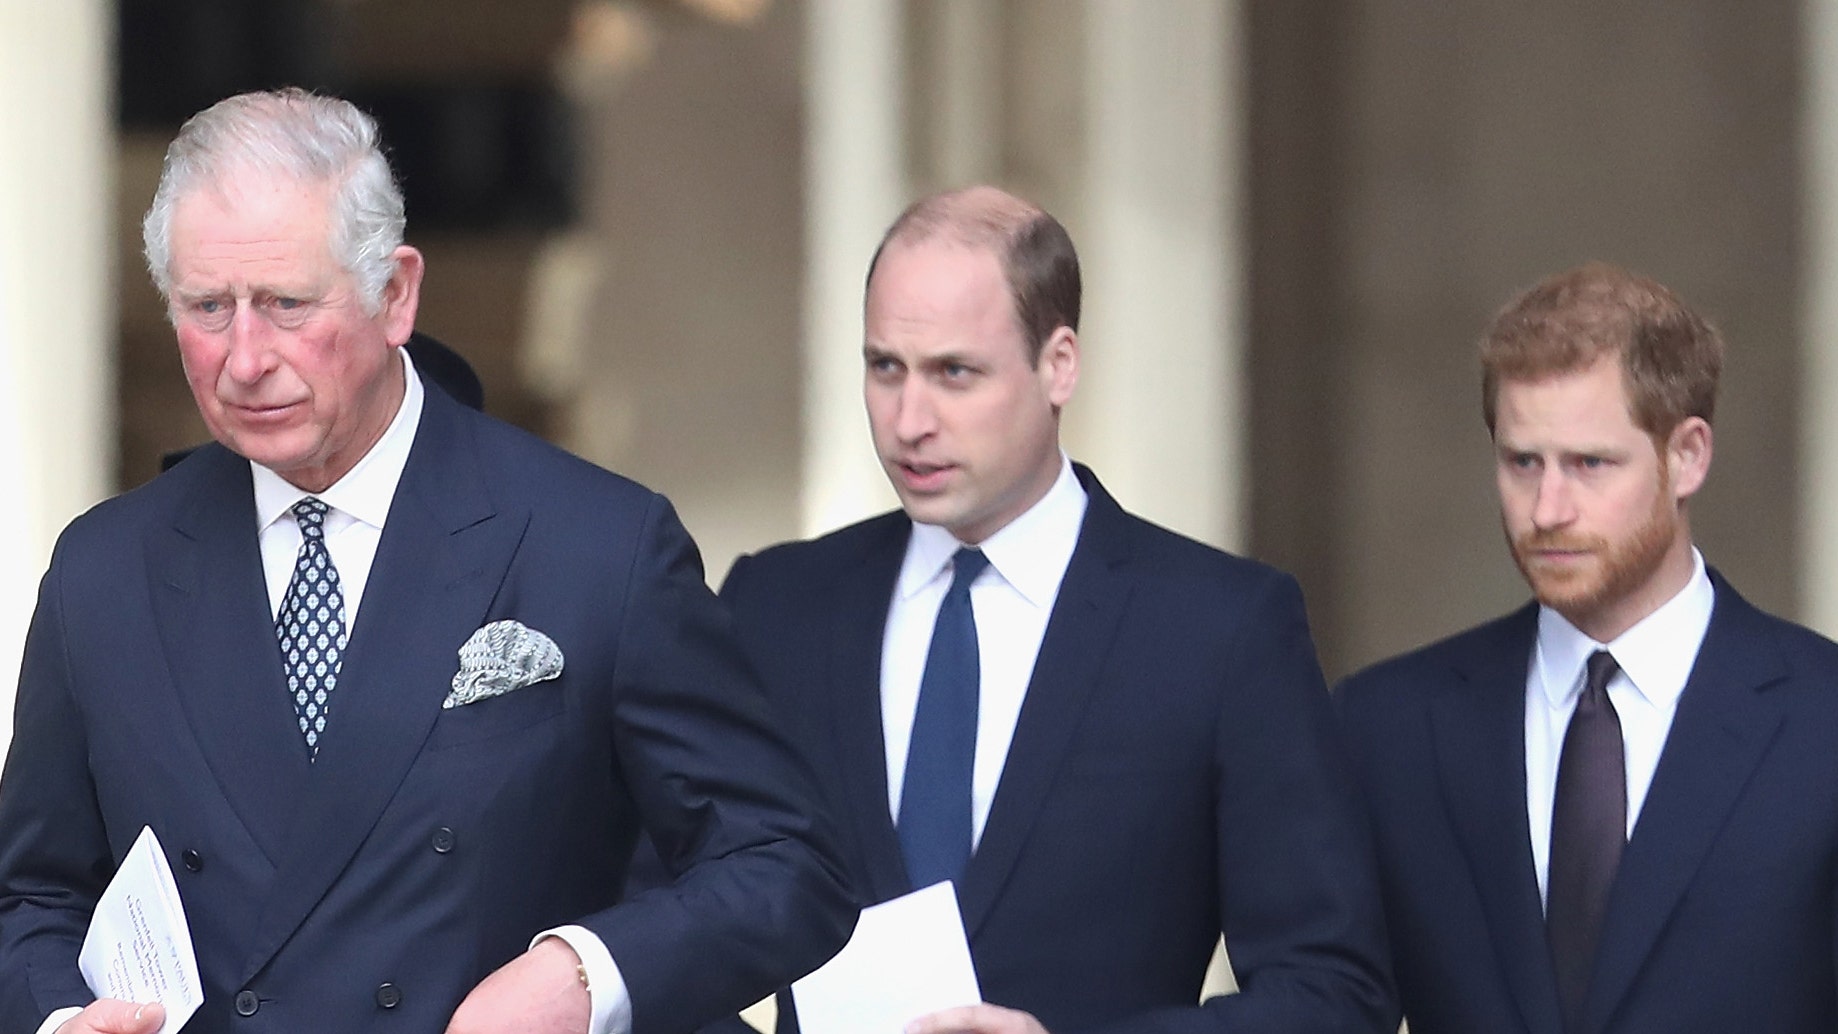 Prince Harry ‘heartbroken’ with the disagreement in the royal family, friend says: ‘Many hurt feelings’